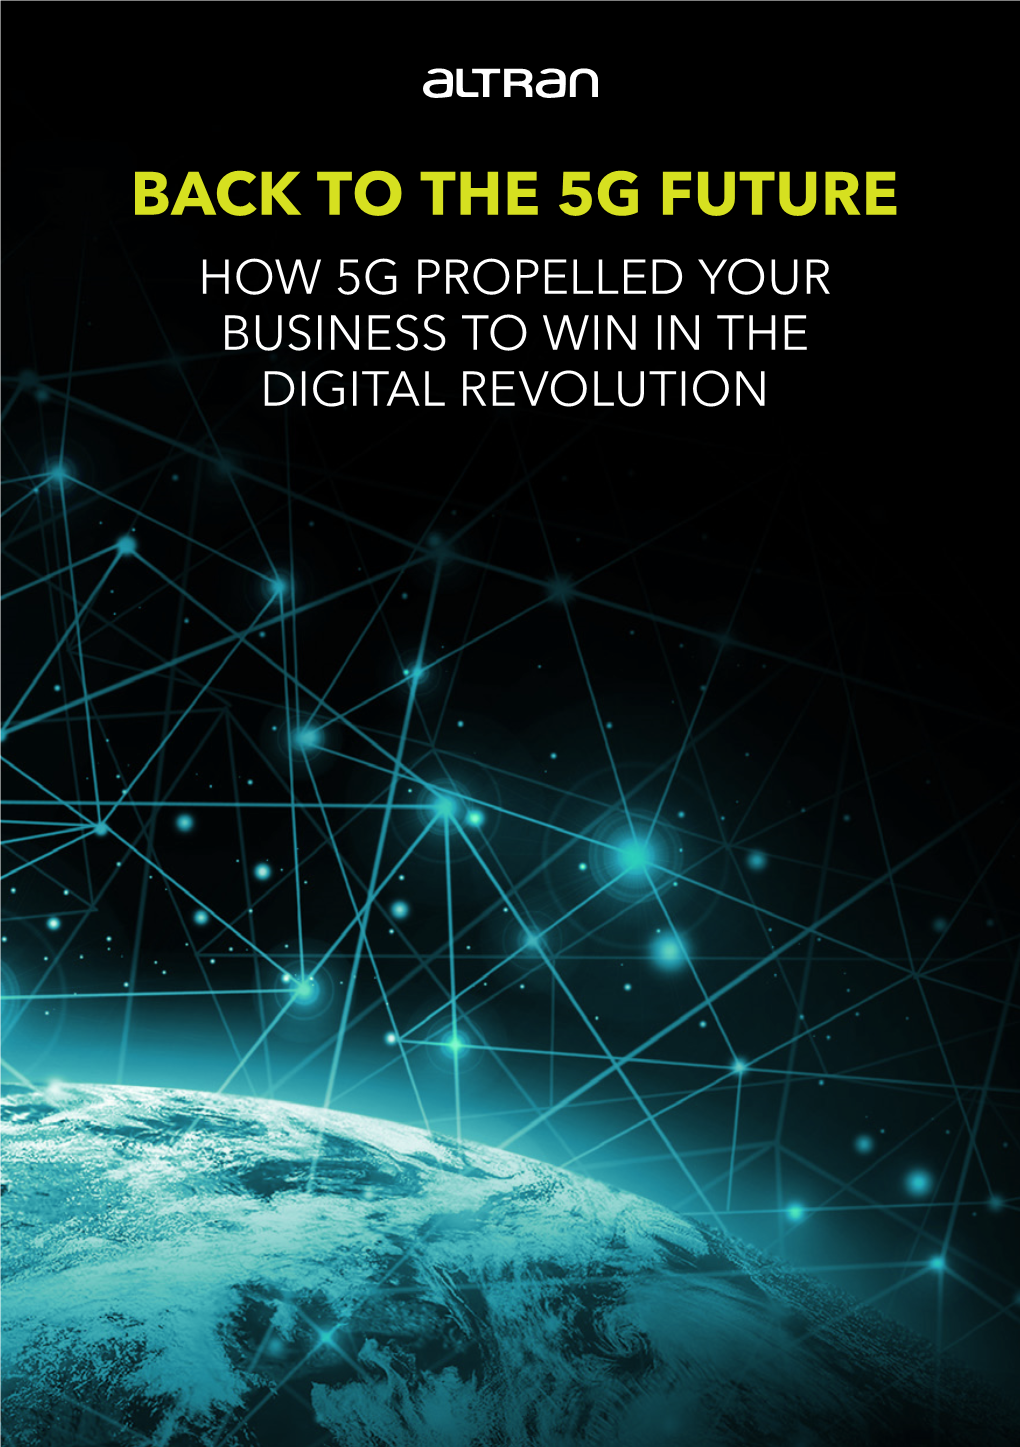 The 5G Future How 5G Propelled Your Business to Win in the Digital Revolution Table of Content